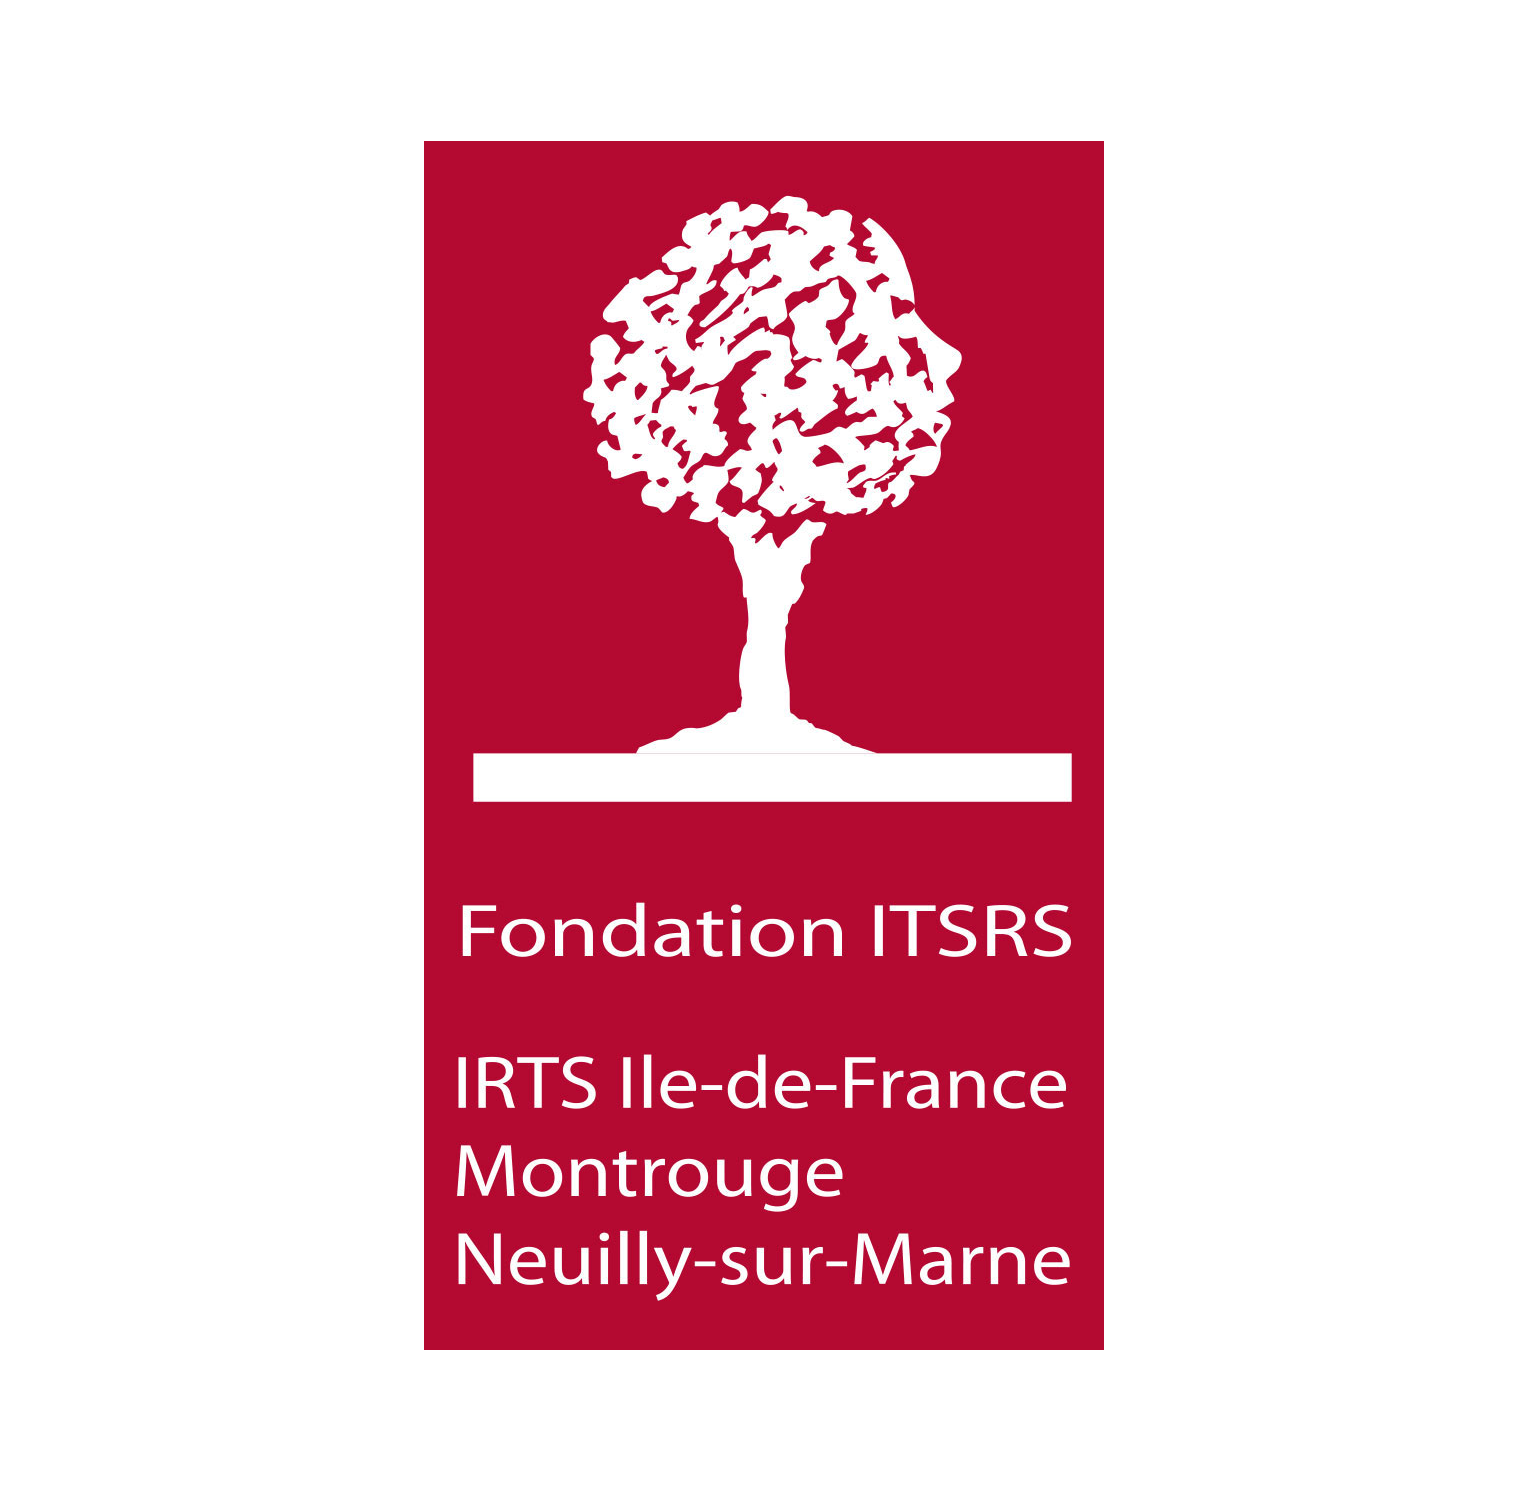 IRTS nuilly sur marne logo